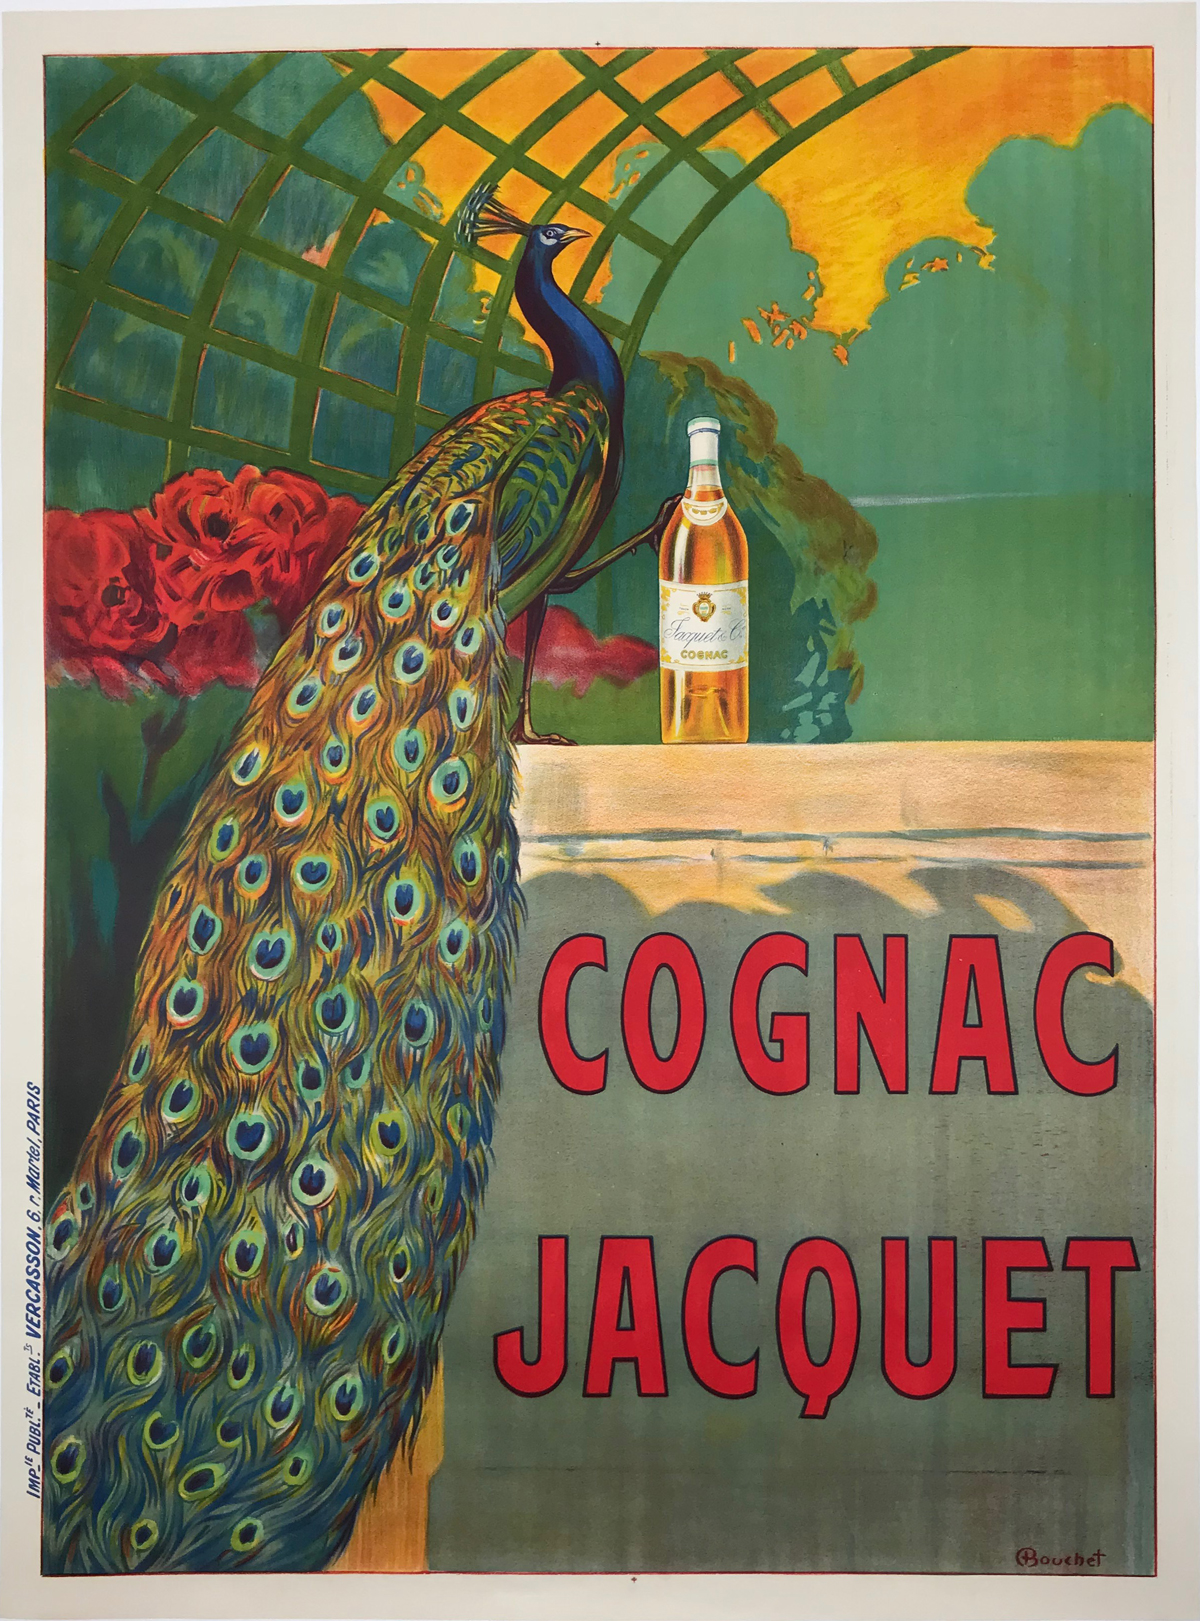 Cognac Jacquet by Bouchet Original 1910 Vintage French Distilerie Advertising Poster Linen Backed. French wine and spirits advertisement features a peacock in a garden with a bottle of liquor.